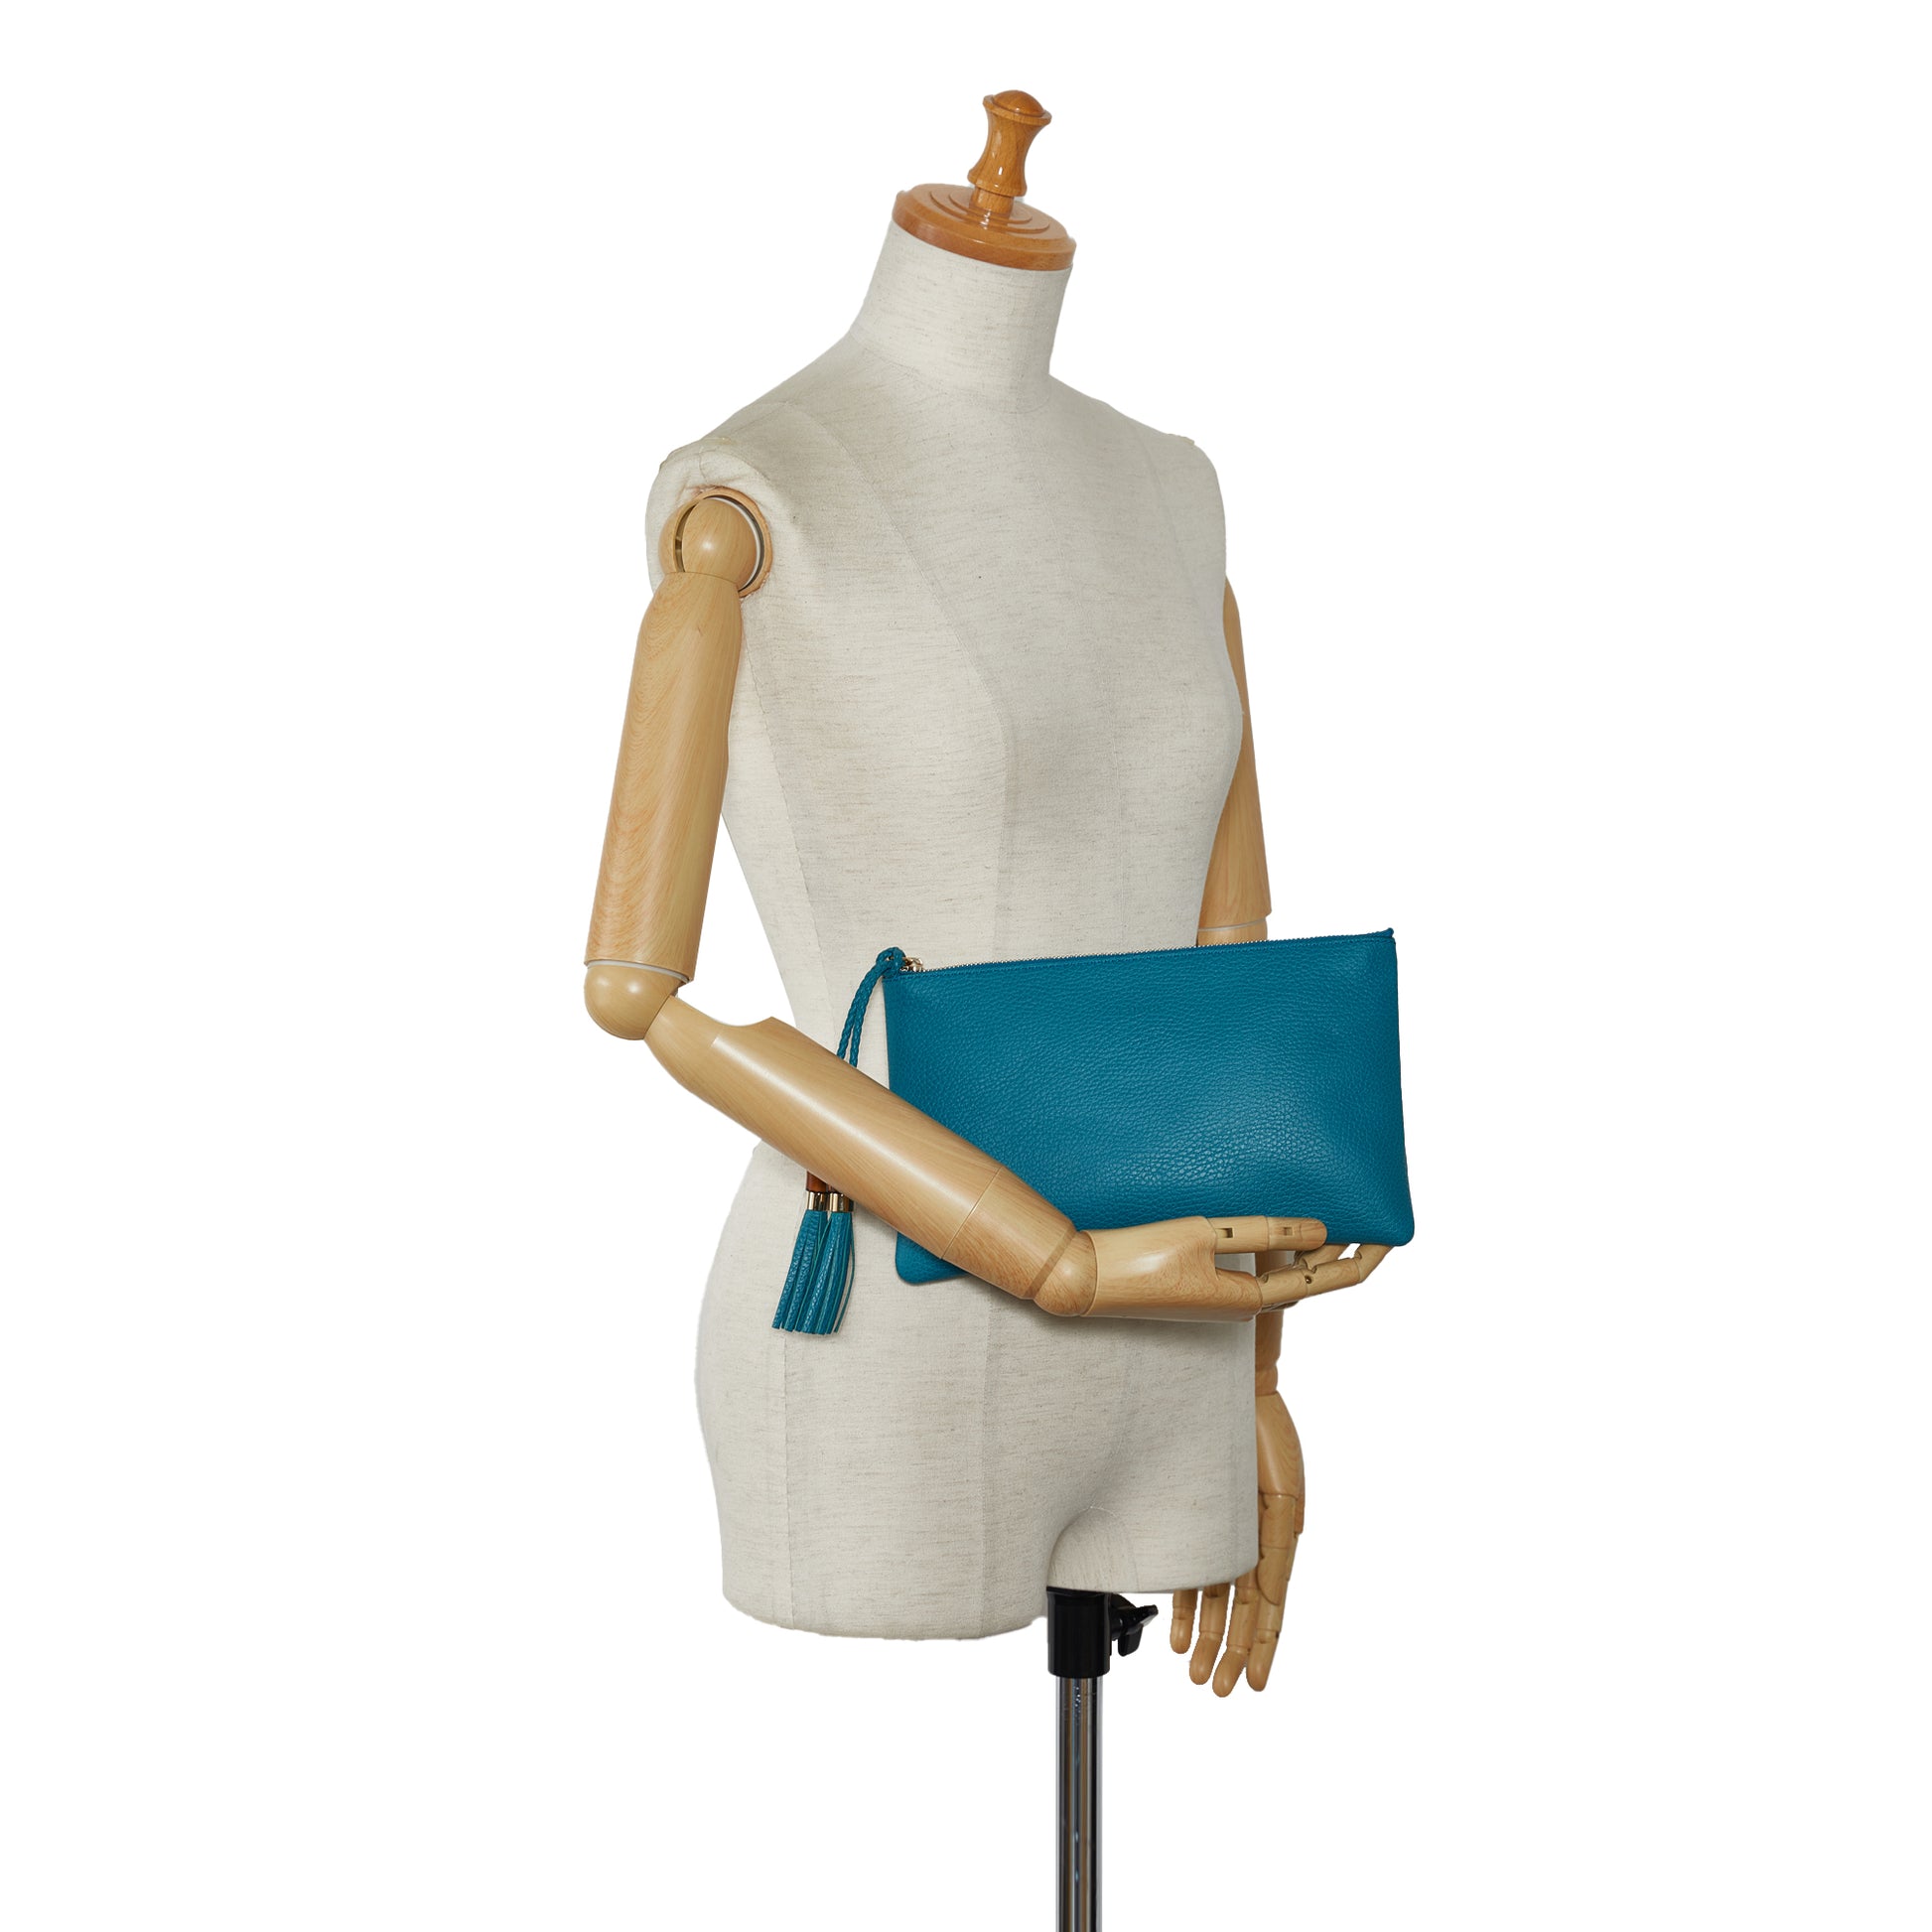 Bamboo Leather Pouch Blue - Gaby Paris